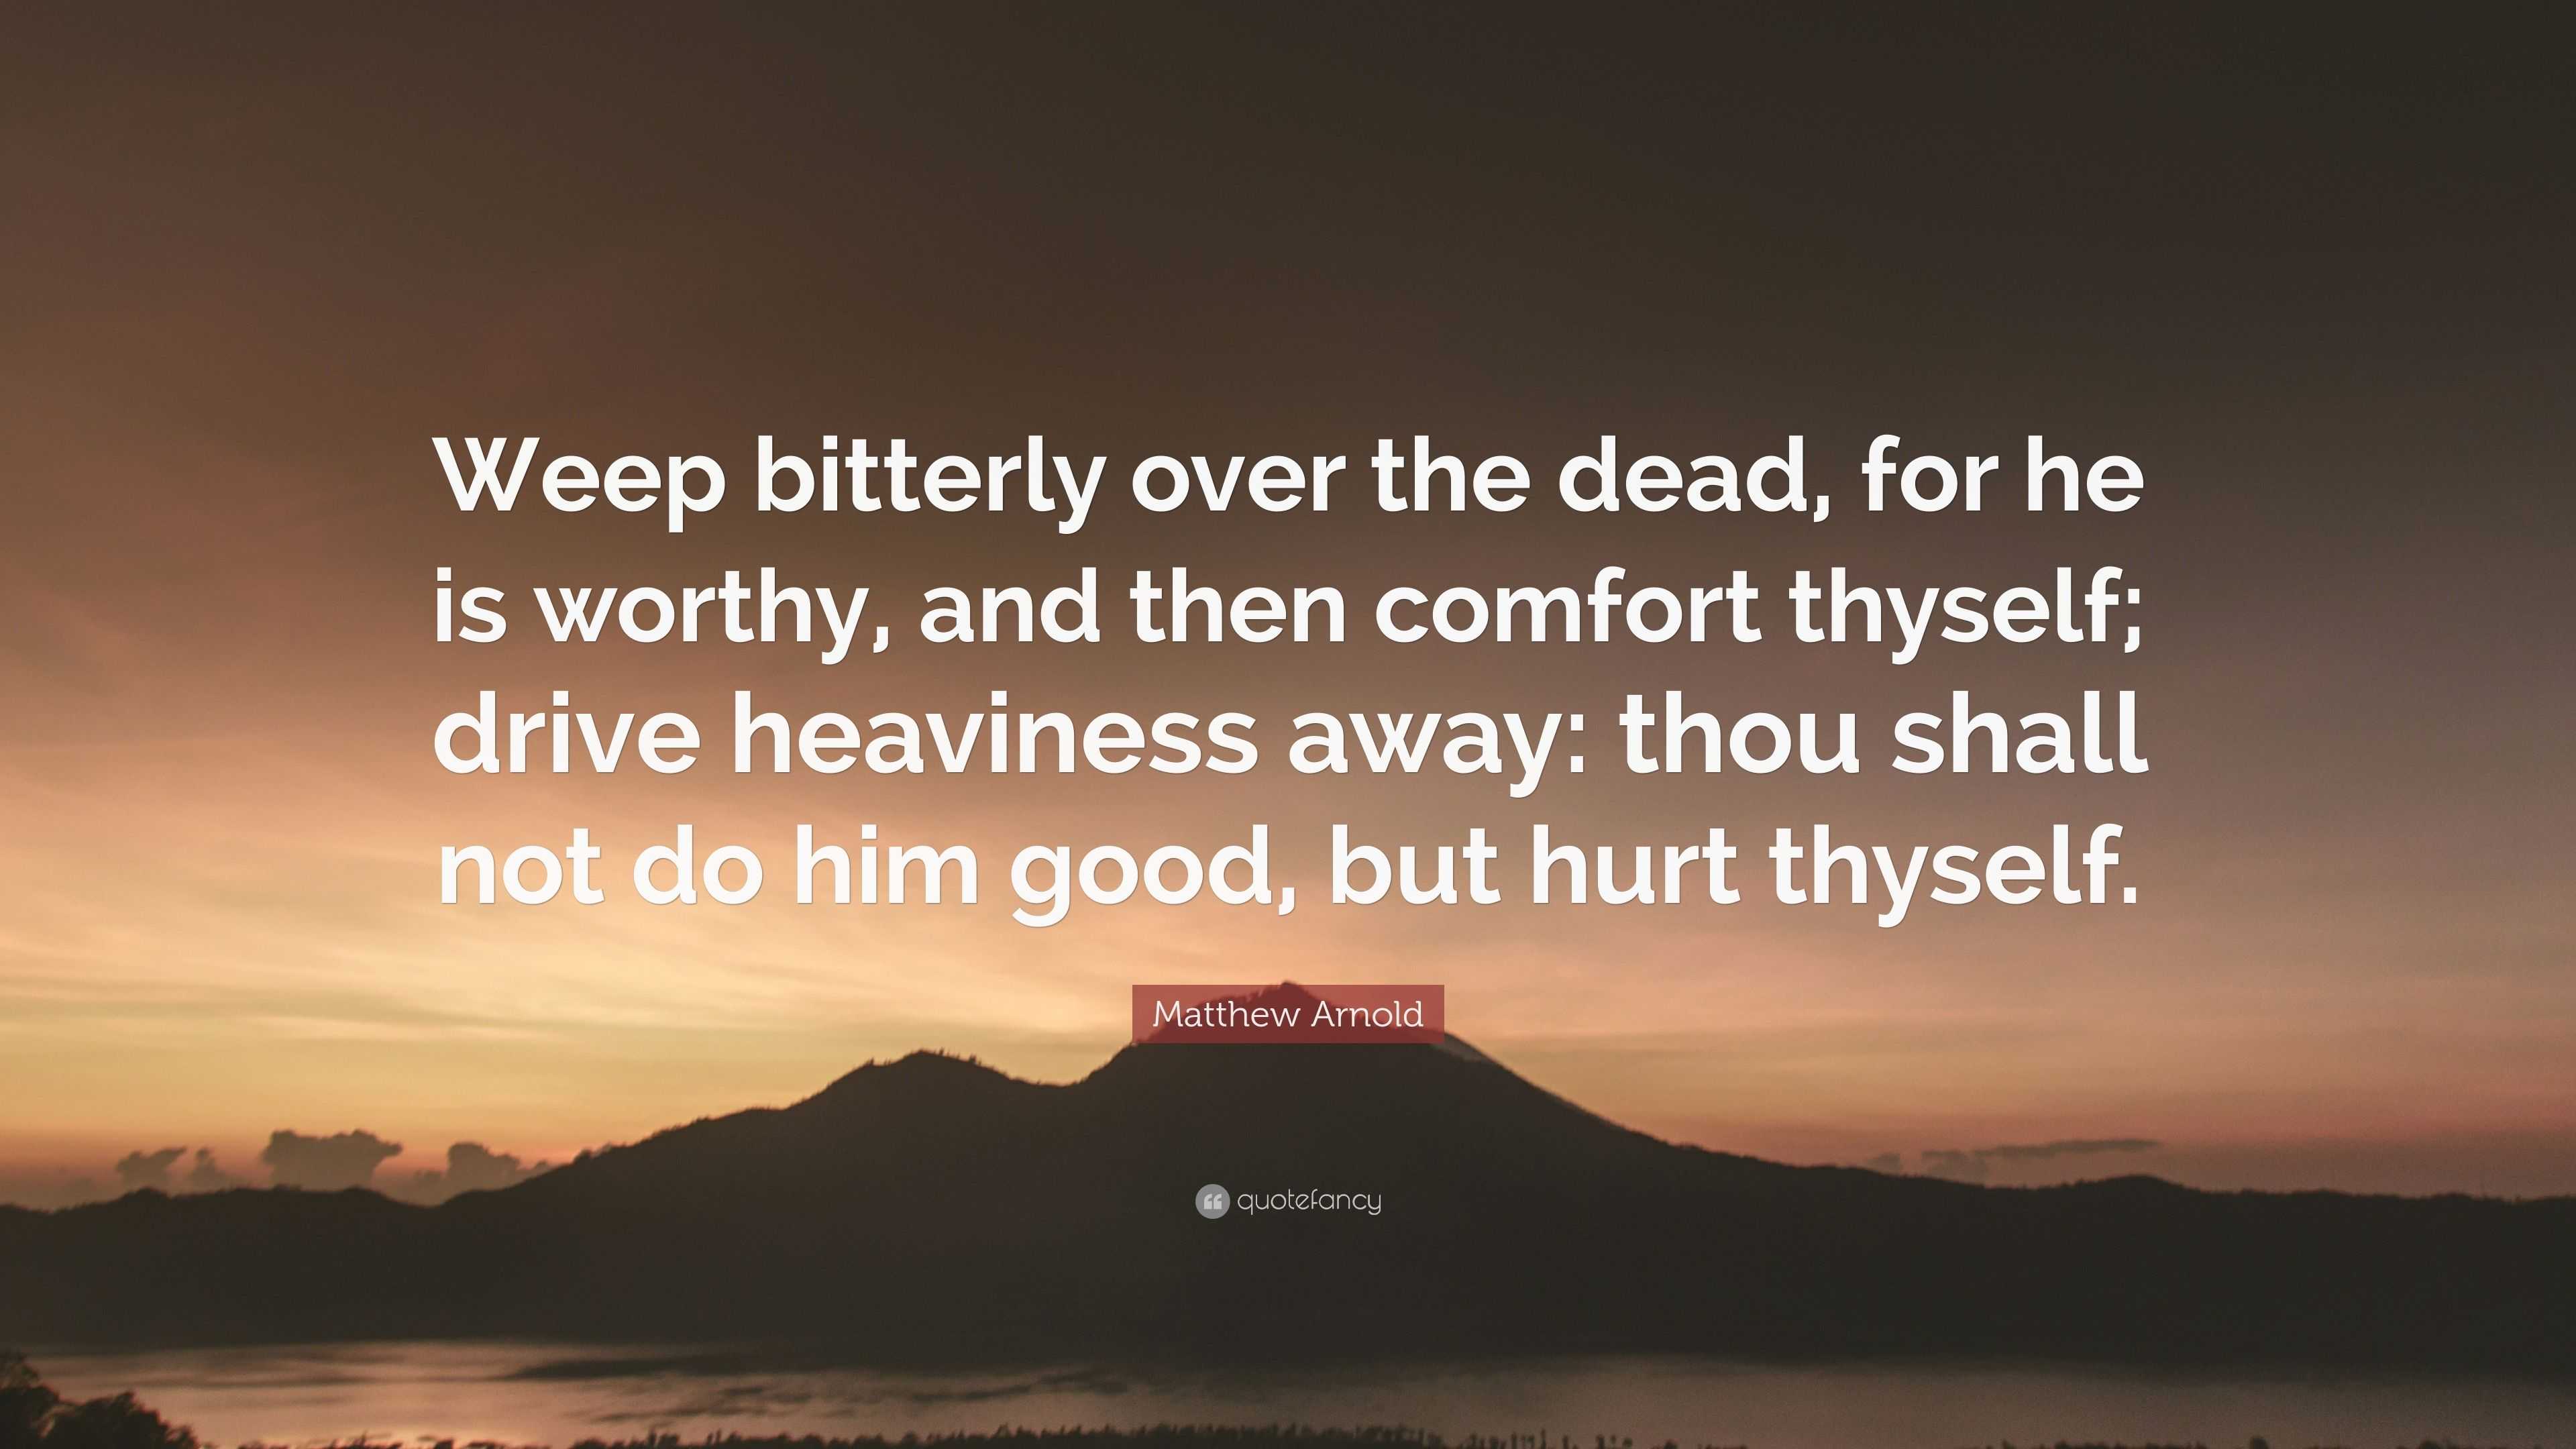 Matthew Arnold Quote: “Weep bitterly over the dead, for he is worthy ...